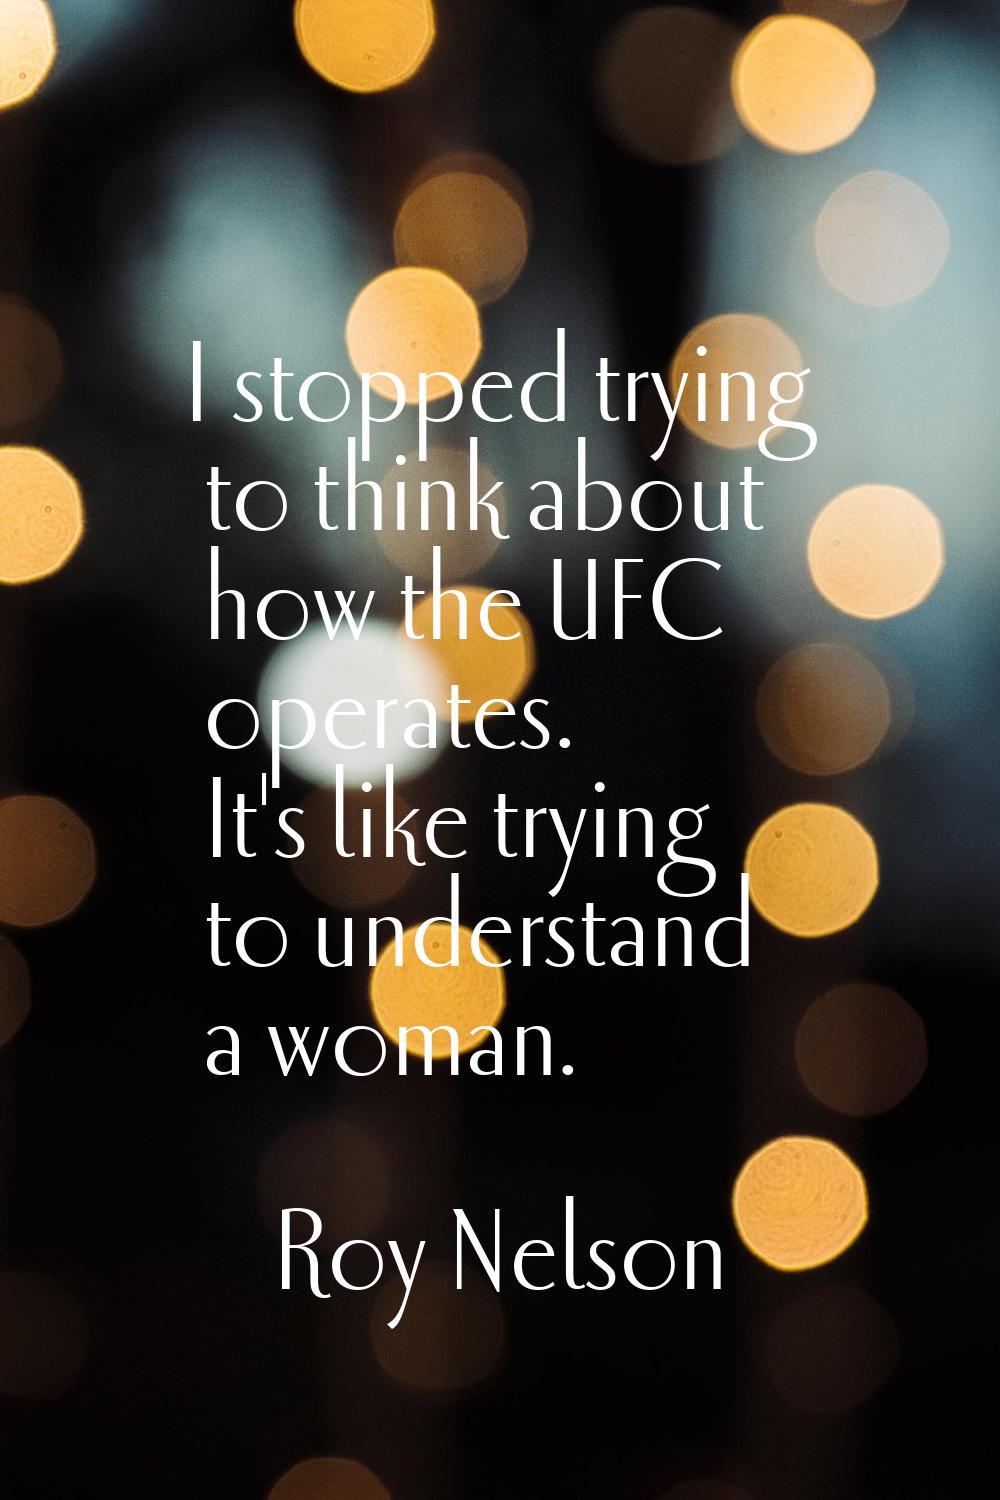 I stopped trying to think about how the UFC operates. It's like trying to understand a woman.